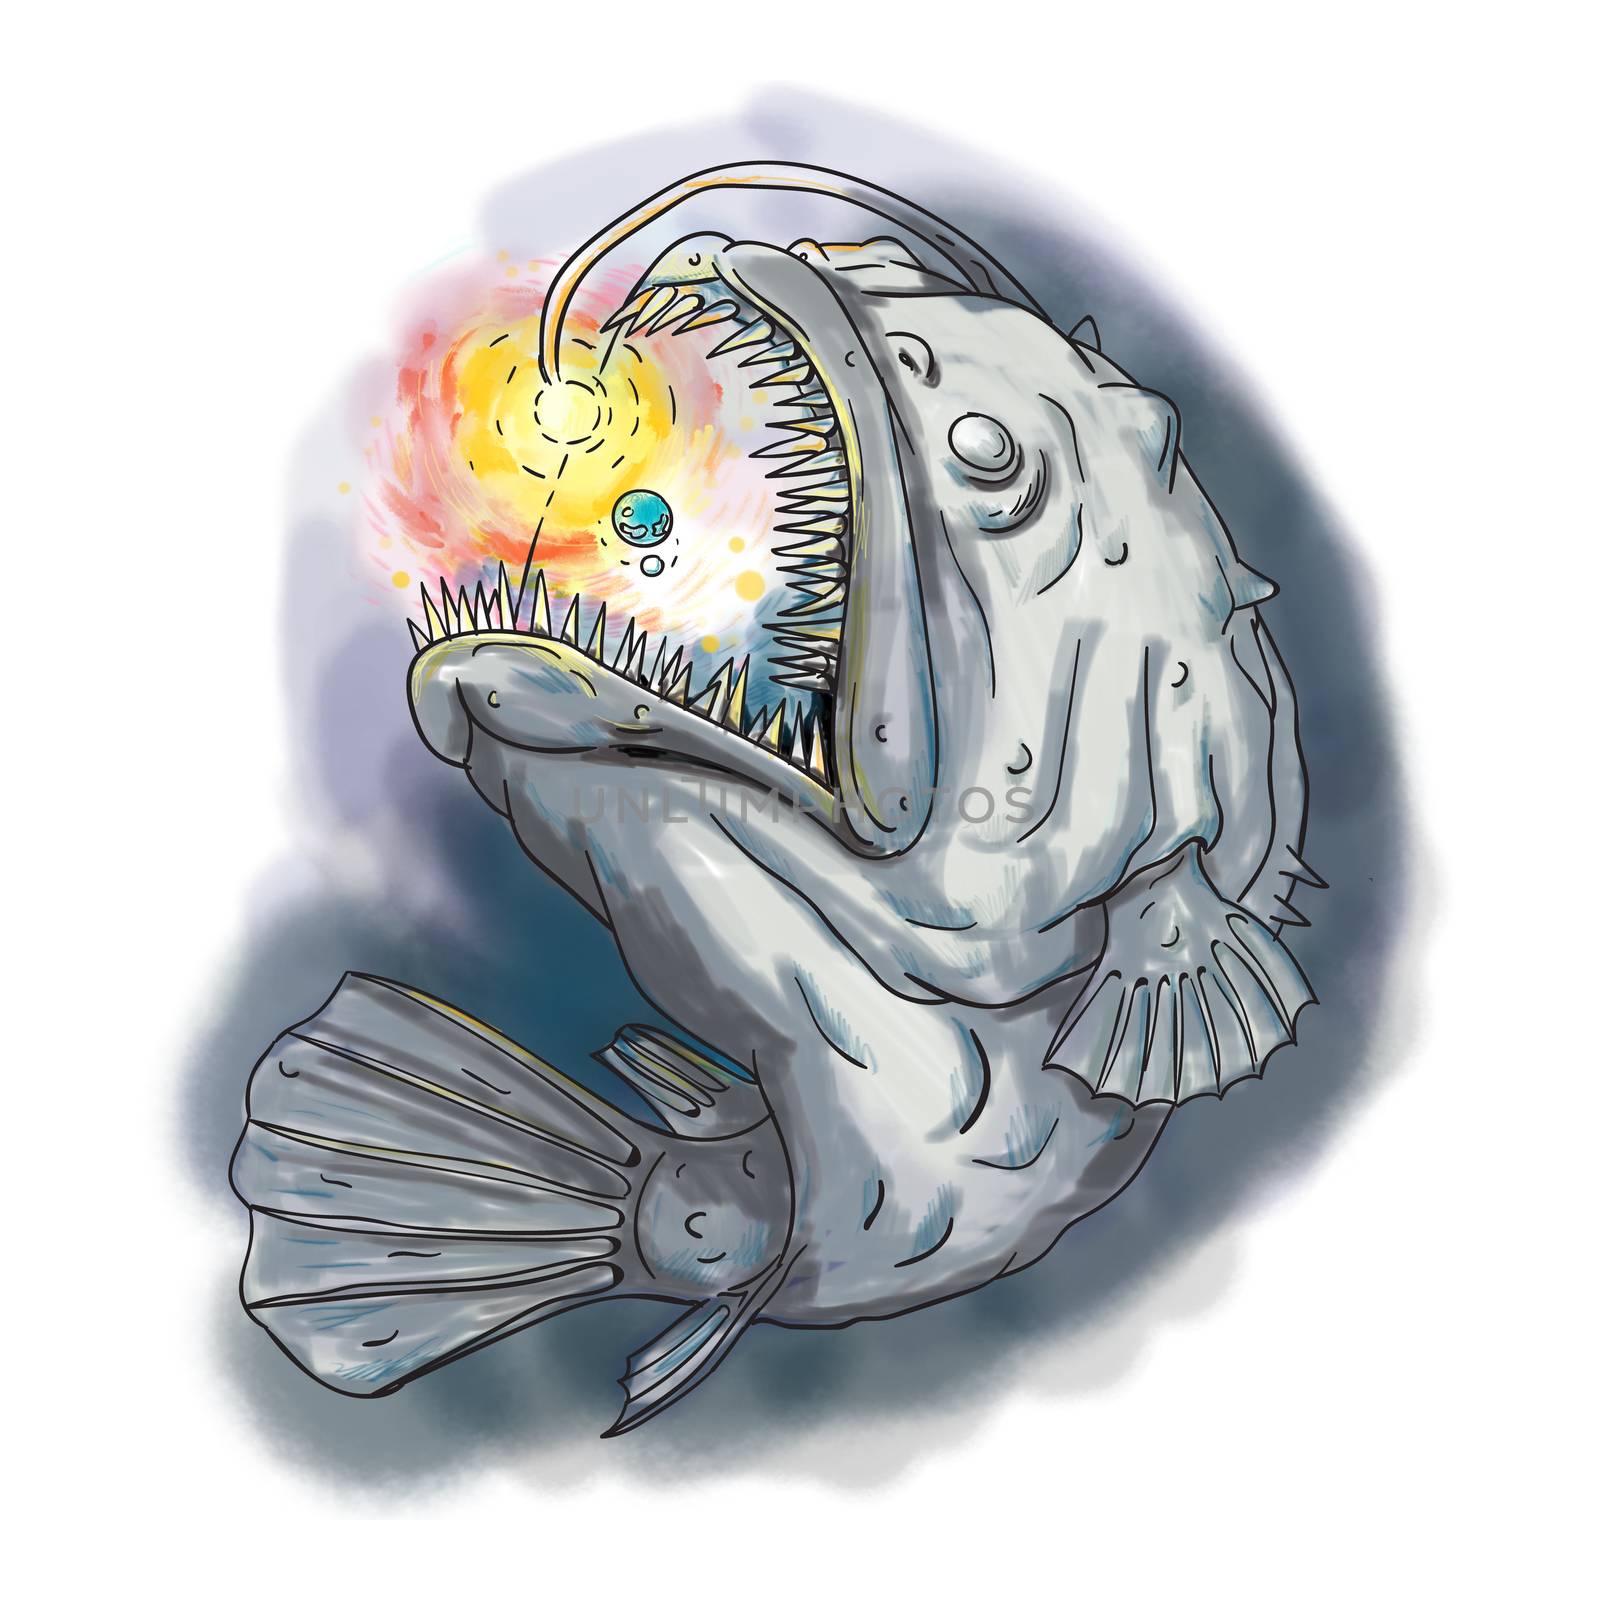 Watercolor style illustration of an Anglerfish of teleost order Lophiiformes that are bony fish named for their characteristic mode of predation, which a fleshy growth from fish's head (the esca or illicium) acts as a lure, swooping up a solar system viewed from the side set on isolated white background. 